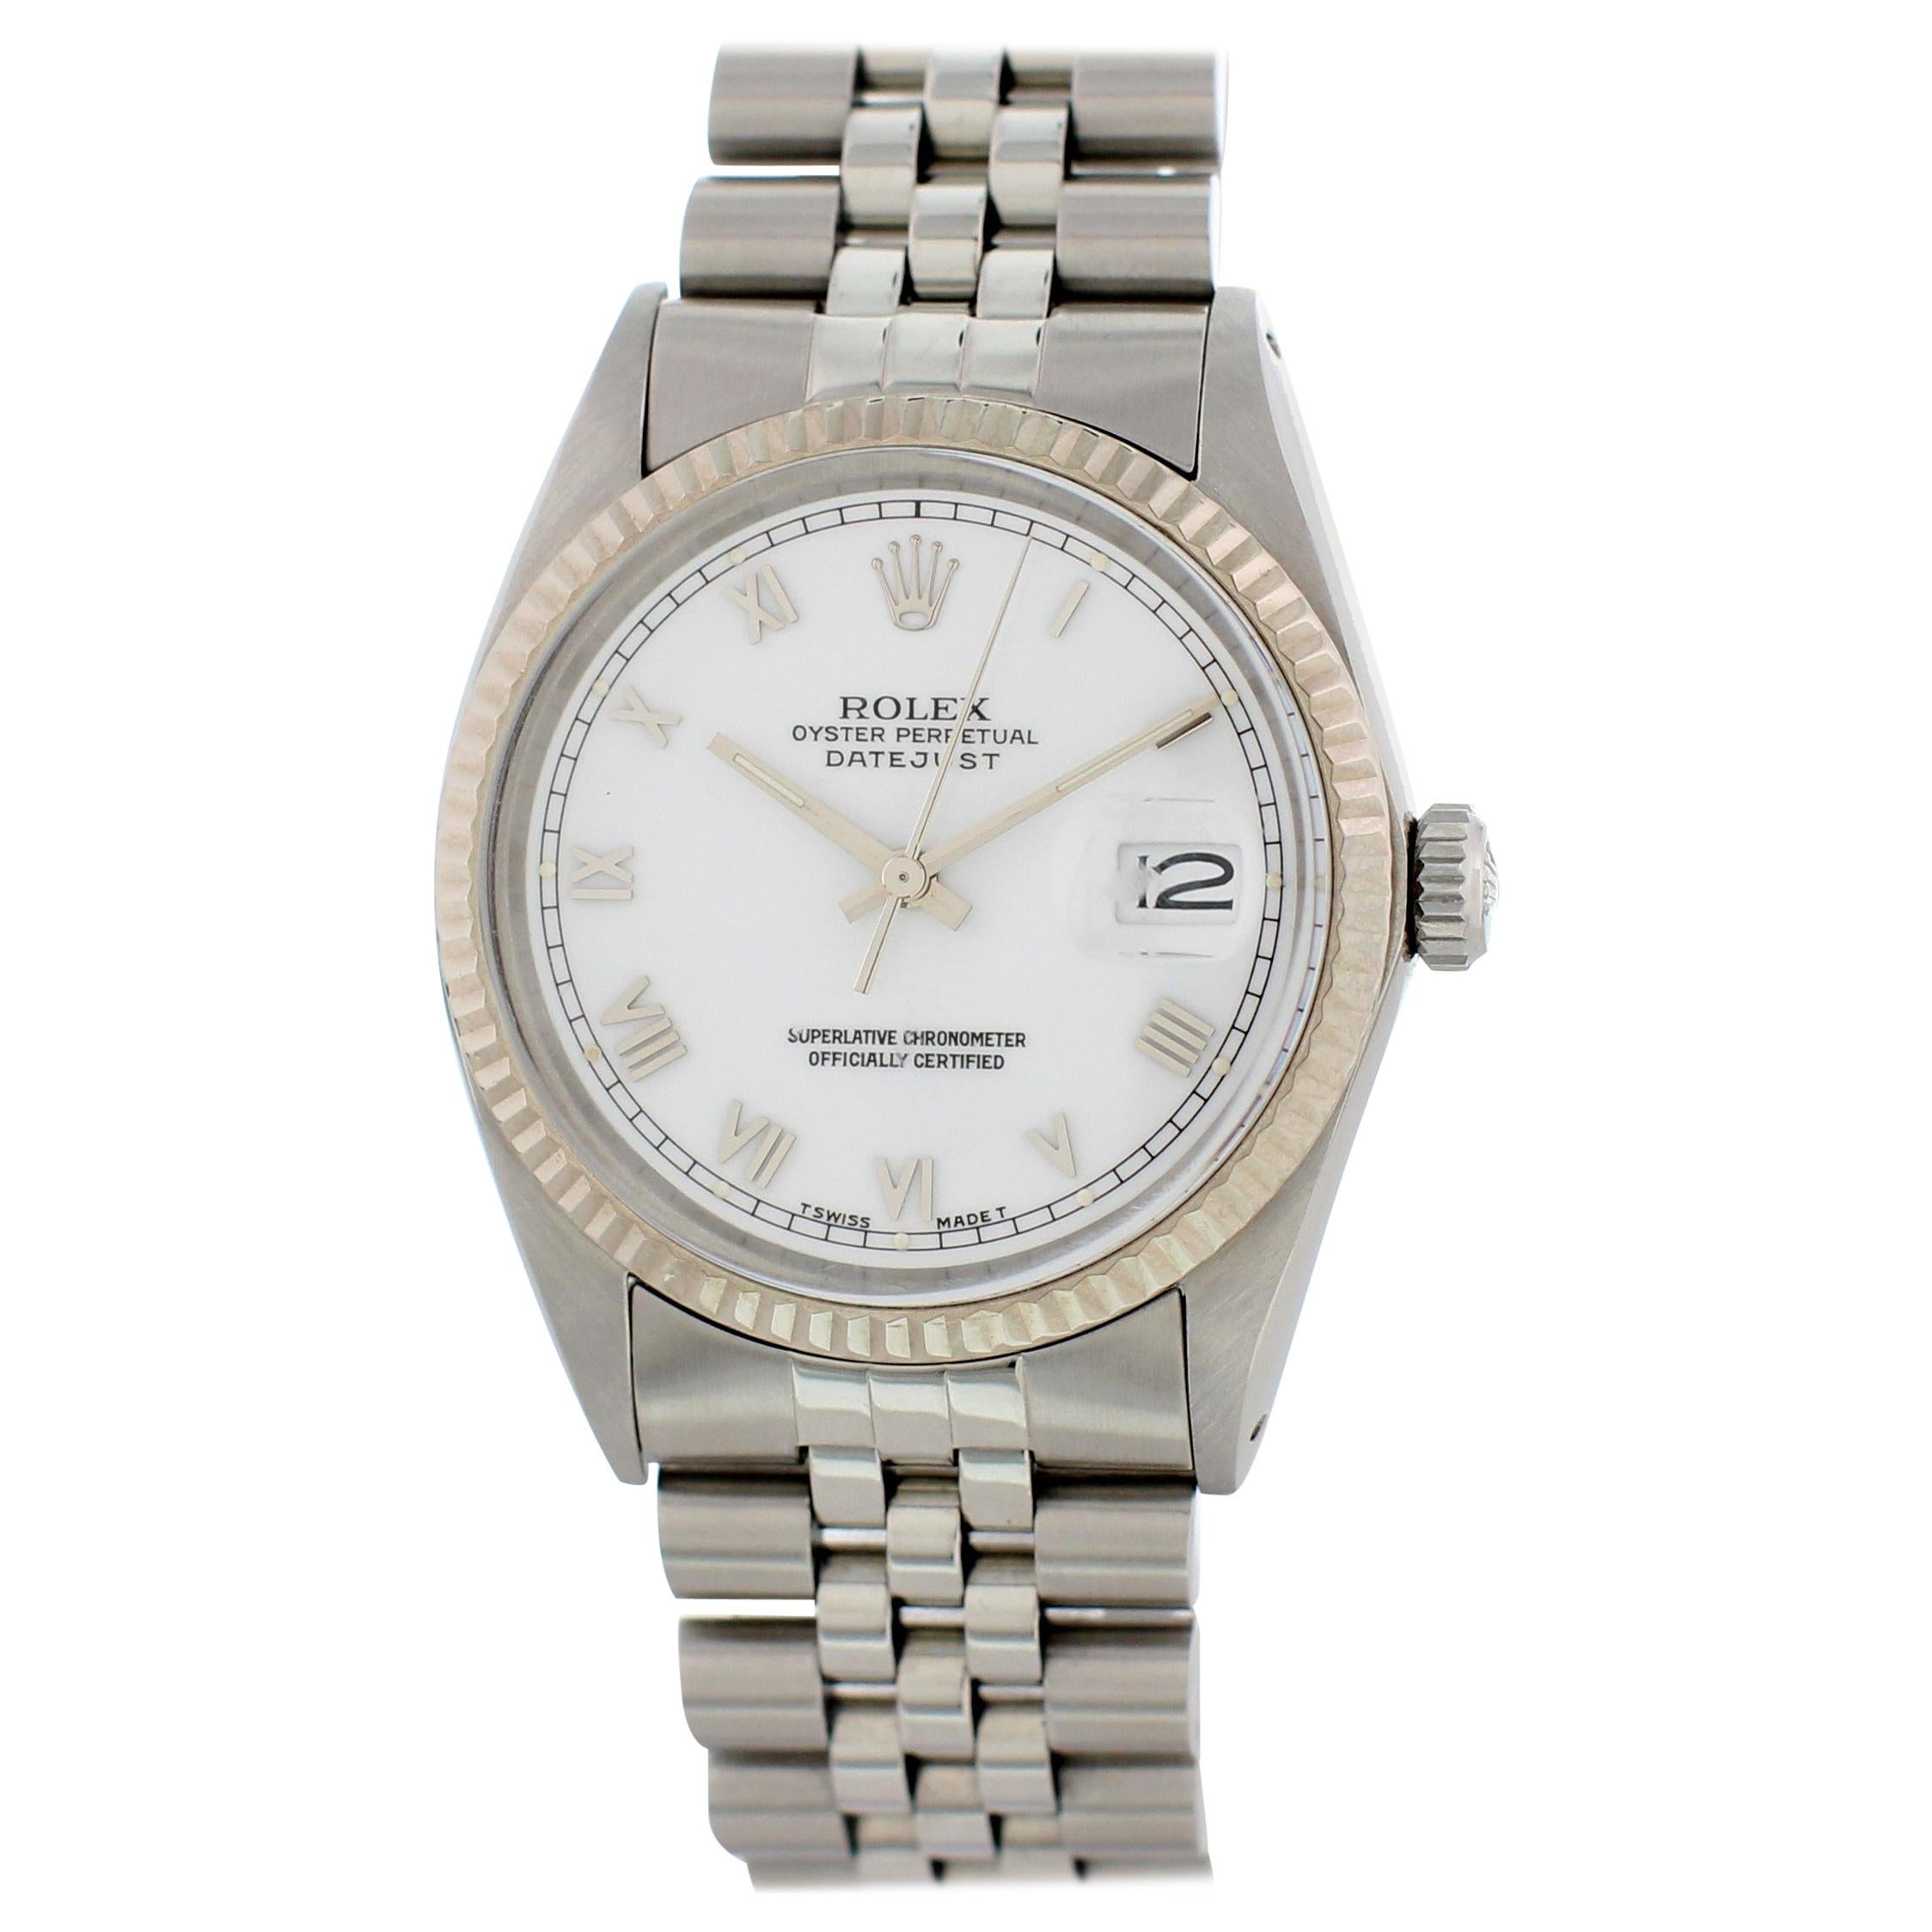 Rolex Oyster Perpetual Datejust 16014 Men's Watch with Papers For Sale